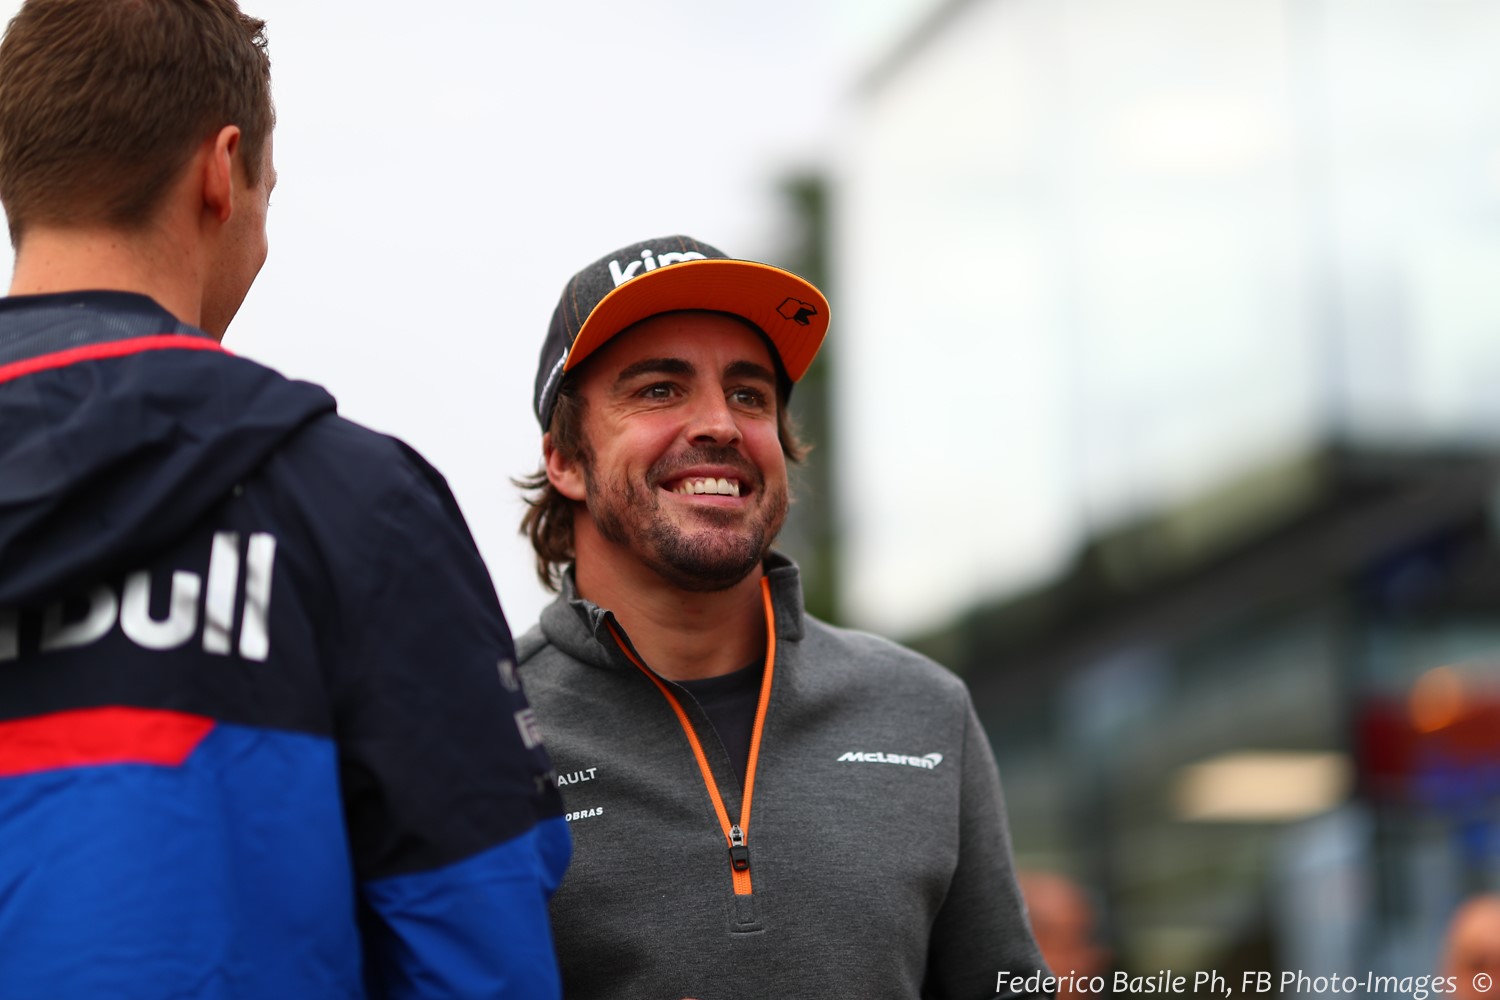 Alonso looks to cherrypick IndyCar's biggest prize and then return to F1. He won't do the entire IndyCar season because globally IndyCar has zero TV coverage because the chose NBC over ABC